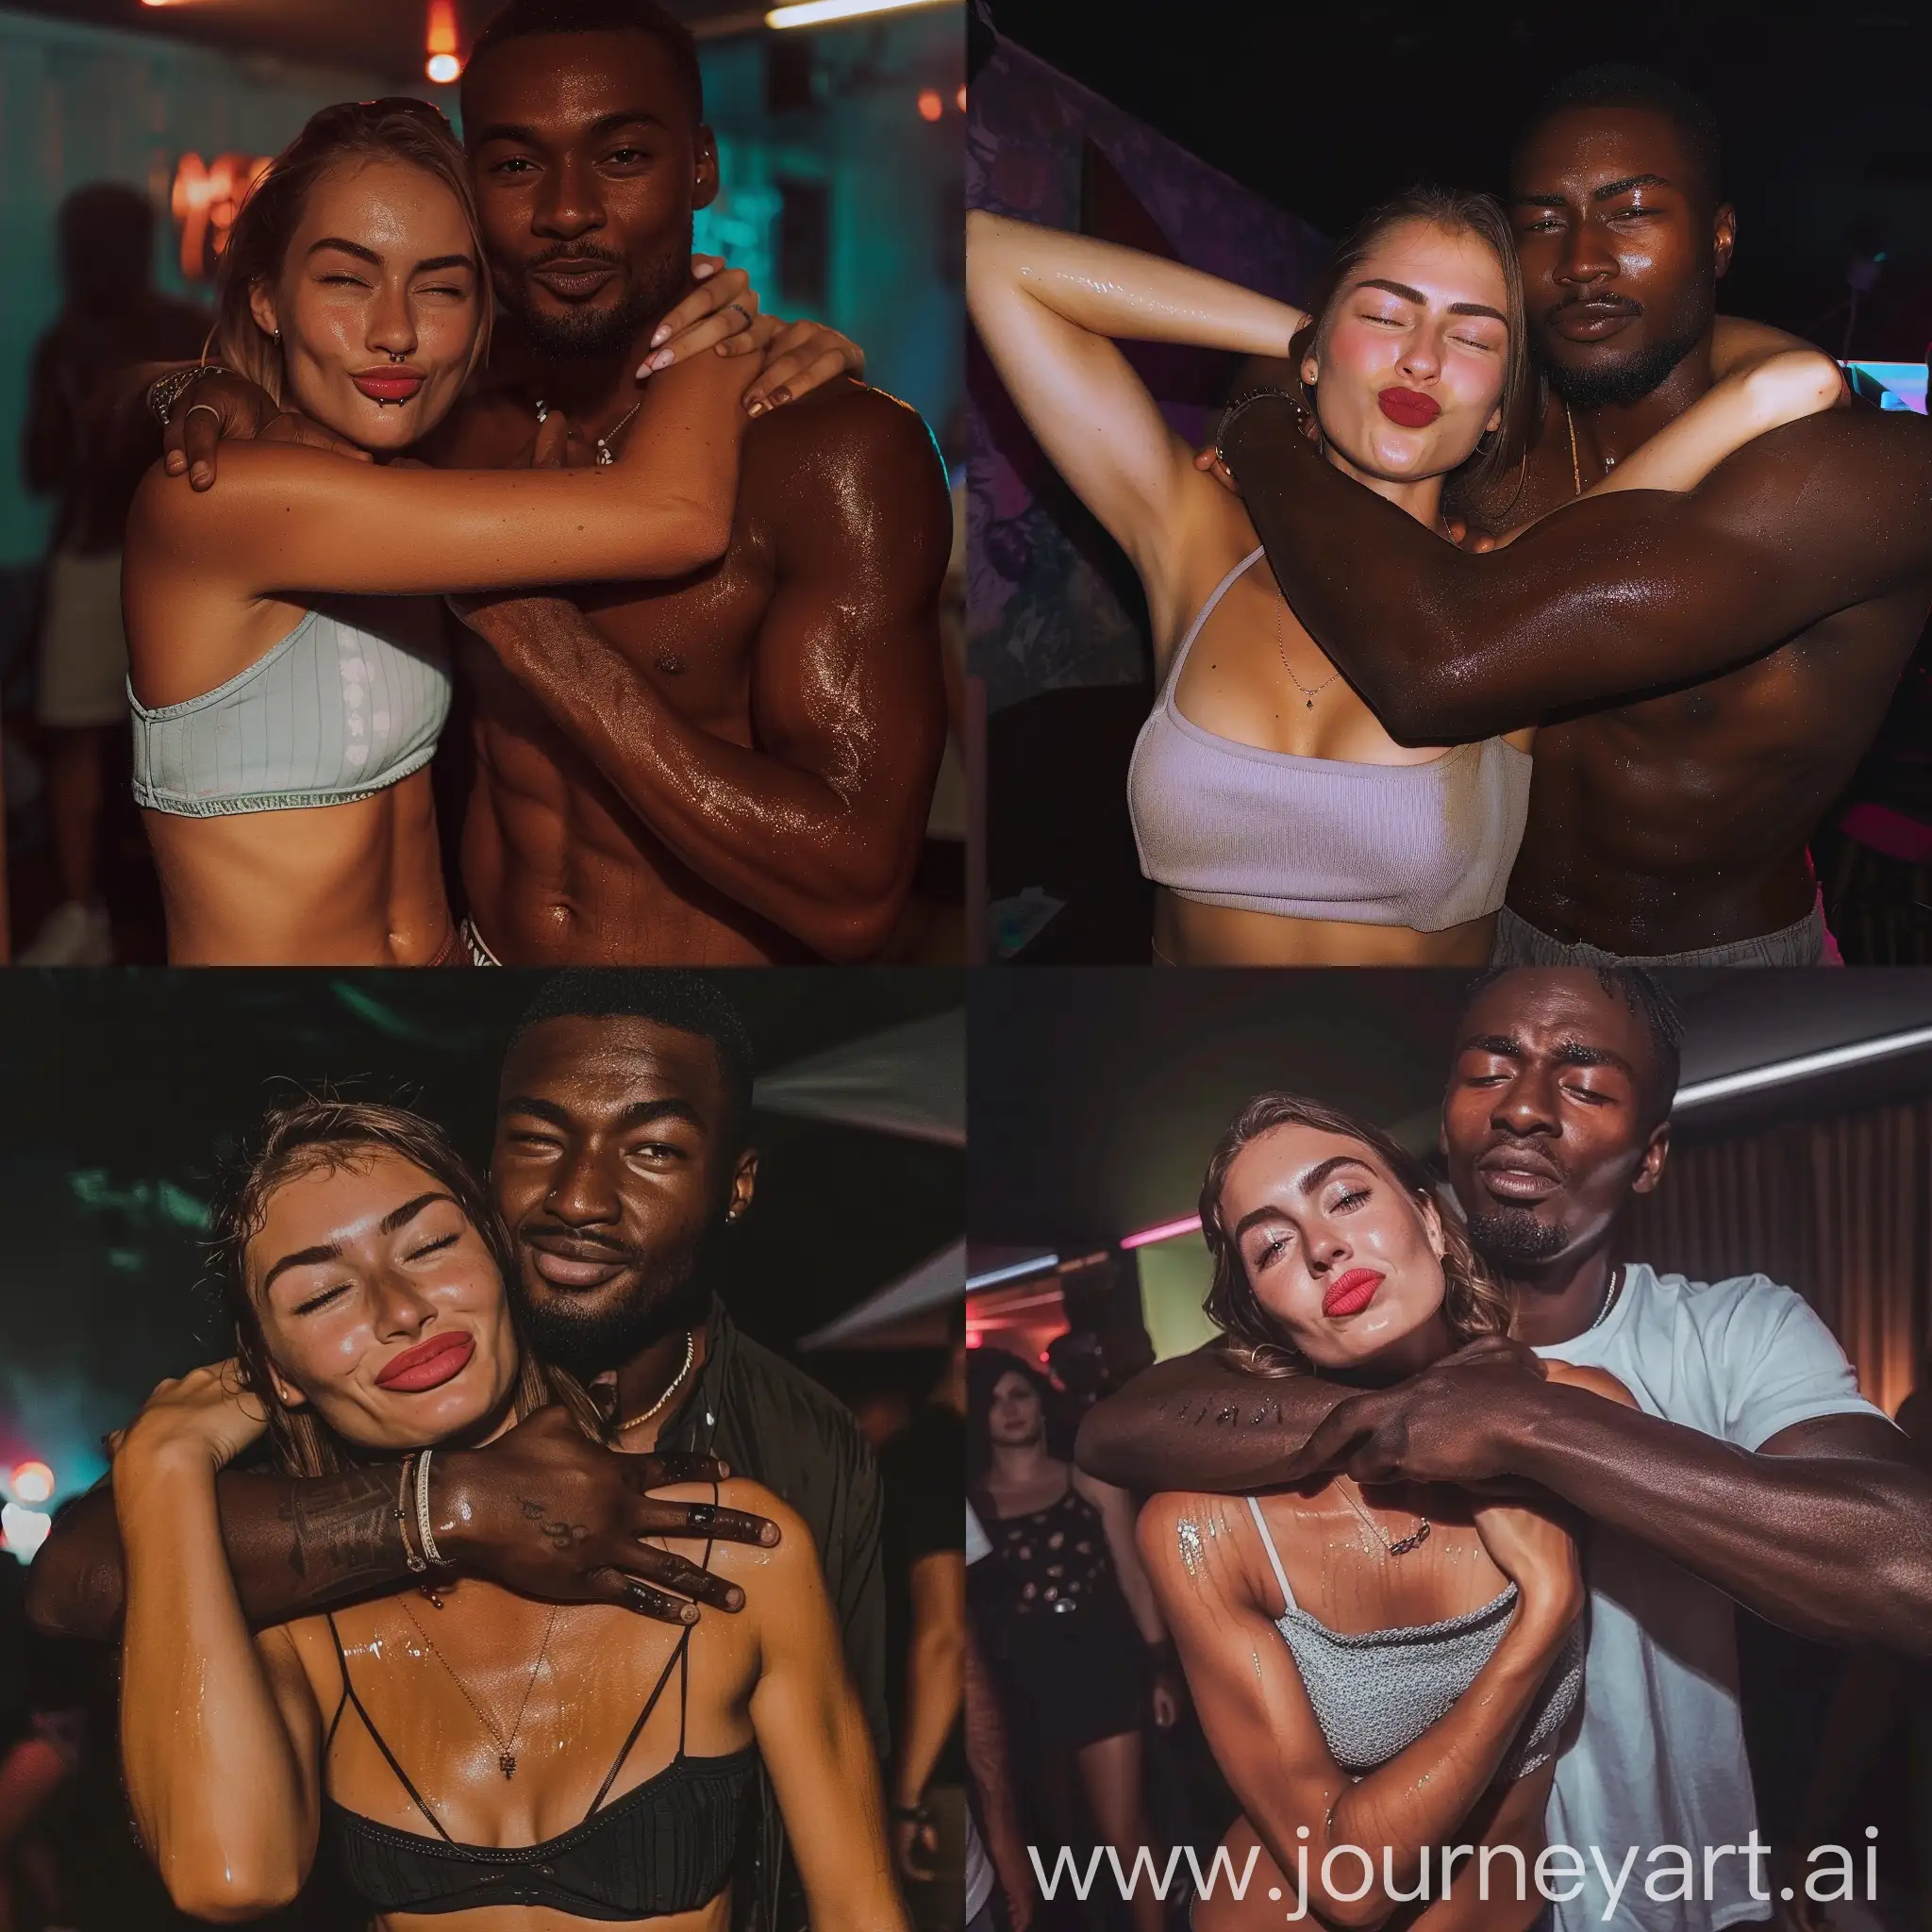 Flirtatious-Instagram-Selfie-German-Woman-and-African-Partner-in-Party-Club-Embrace